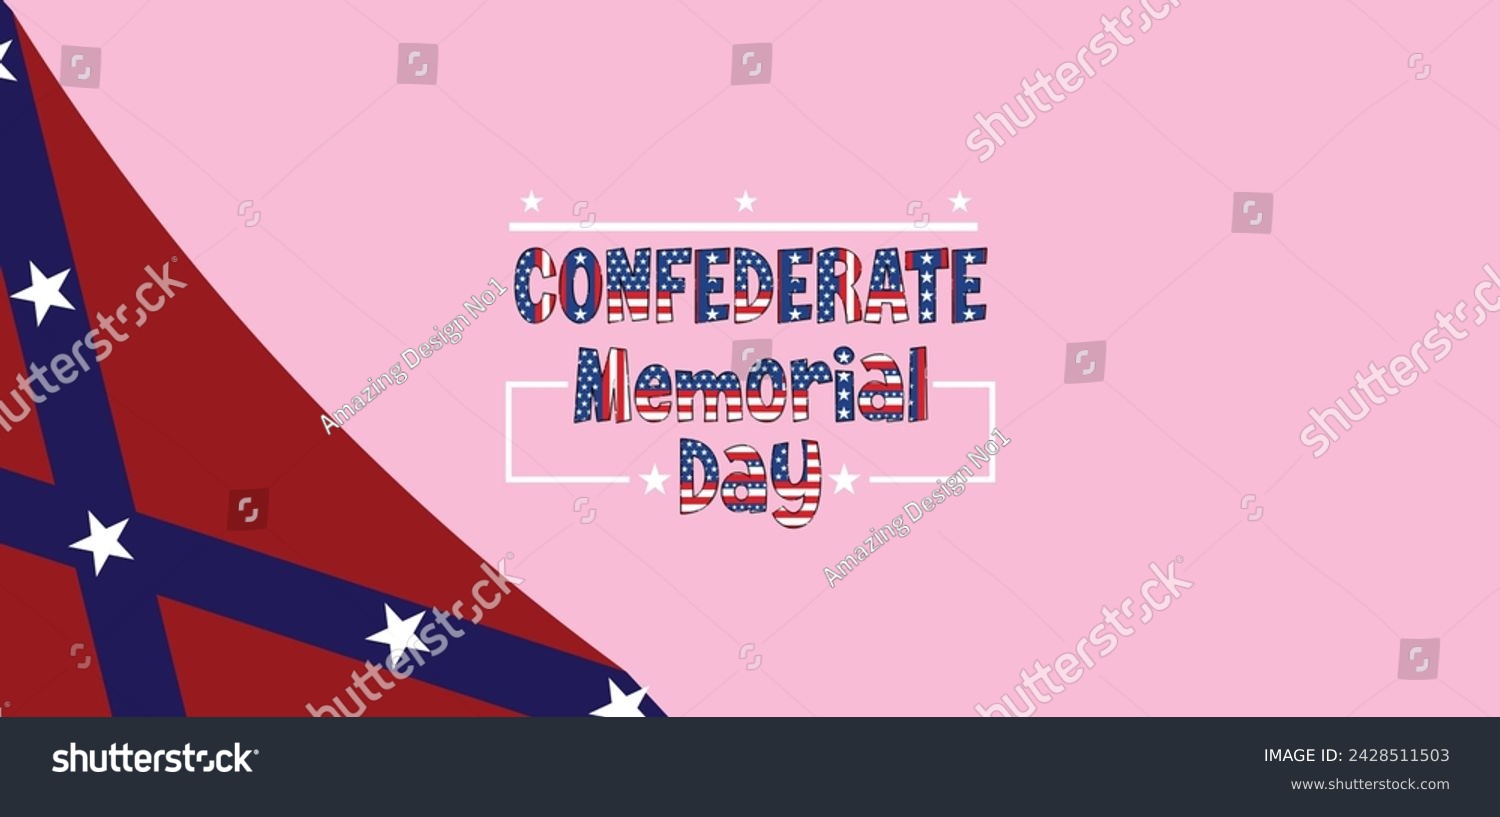 SVG of CONFEDERATE Memorial Day wallpapers and backgrounds you can download and use on your smartphone, tablet, or computer. svg